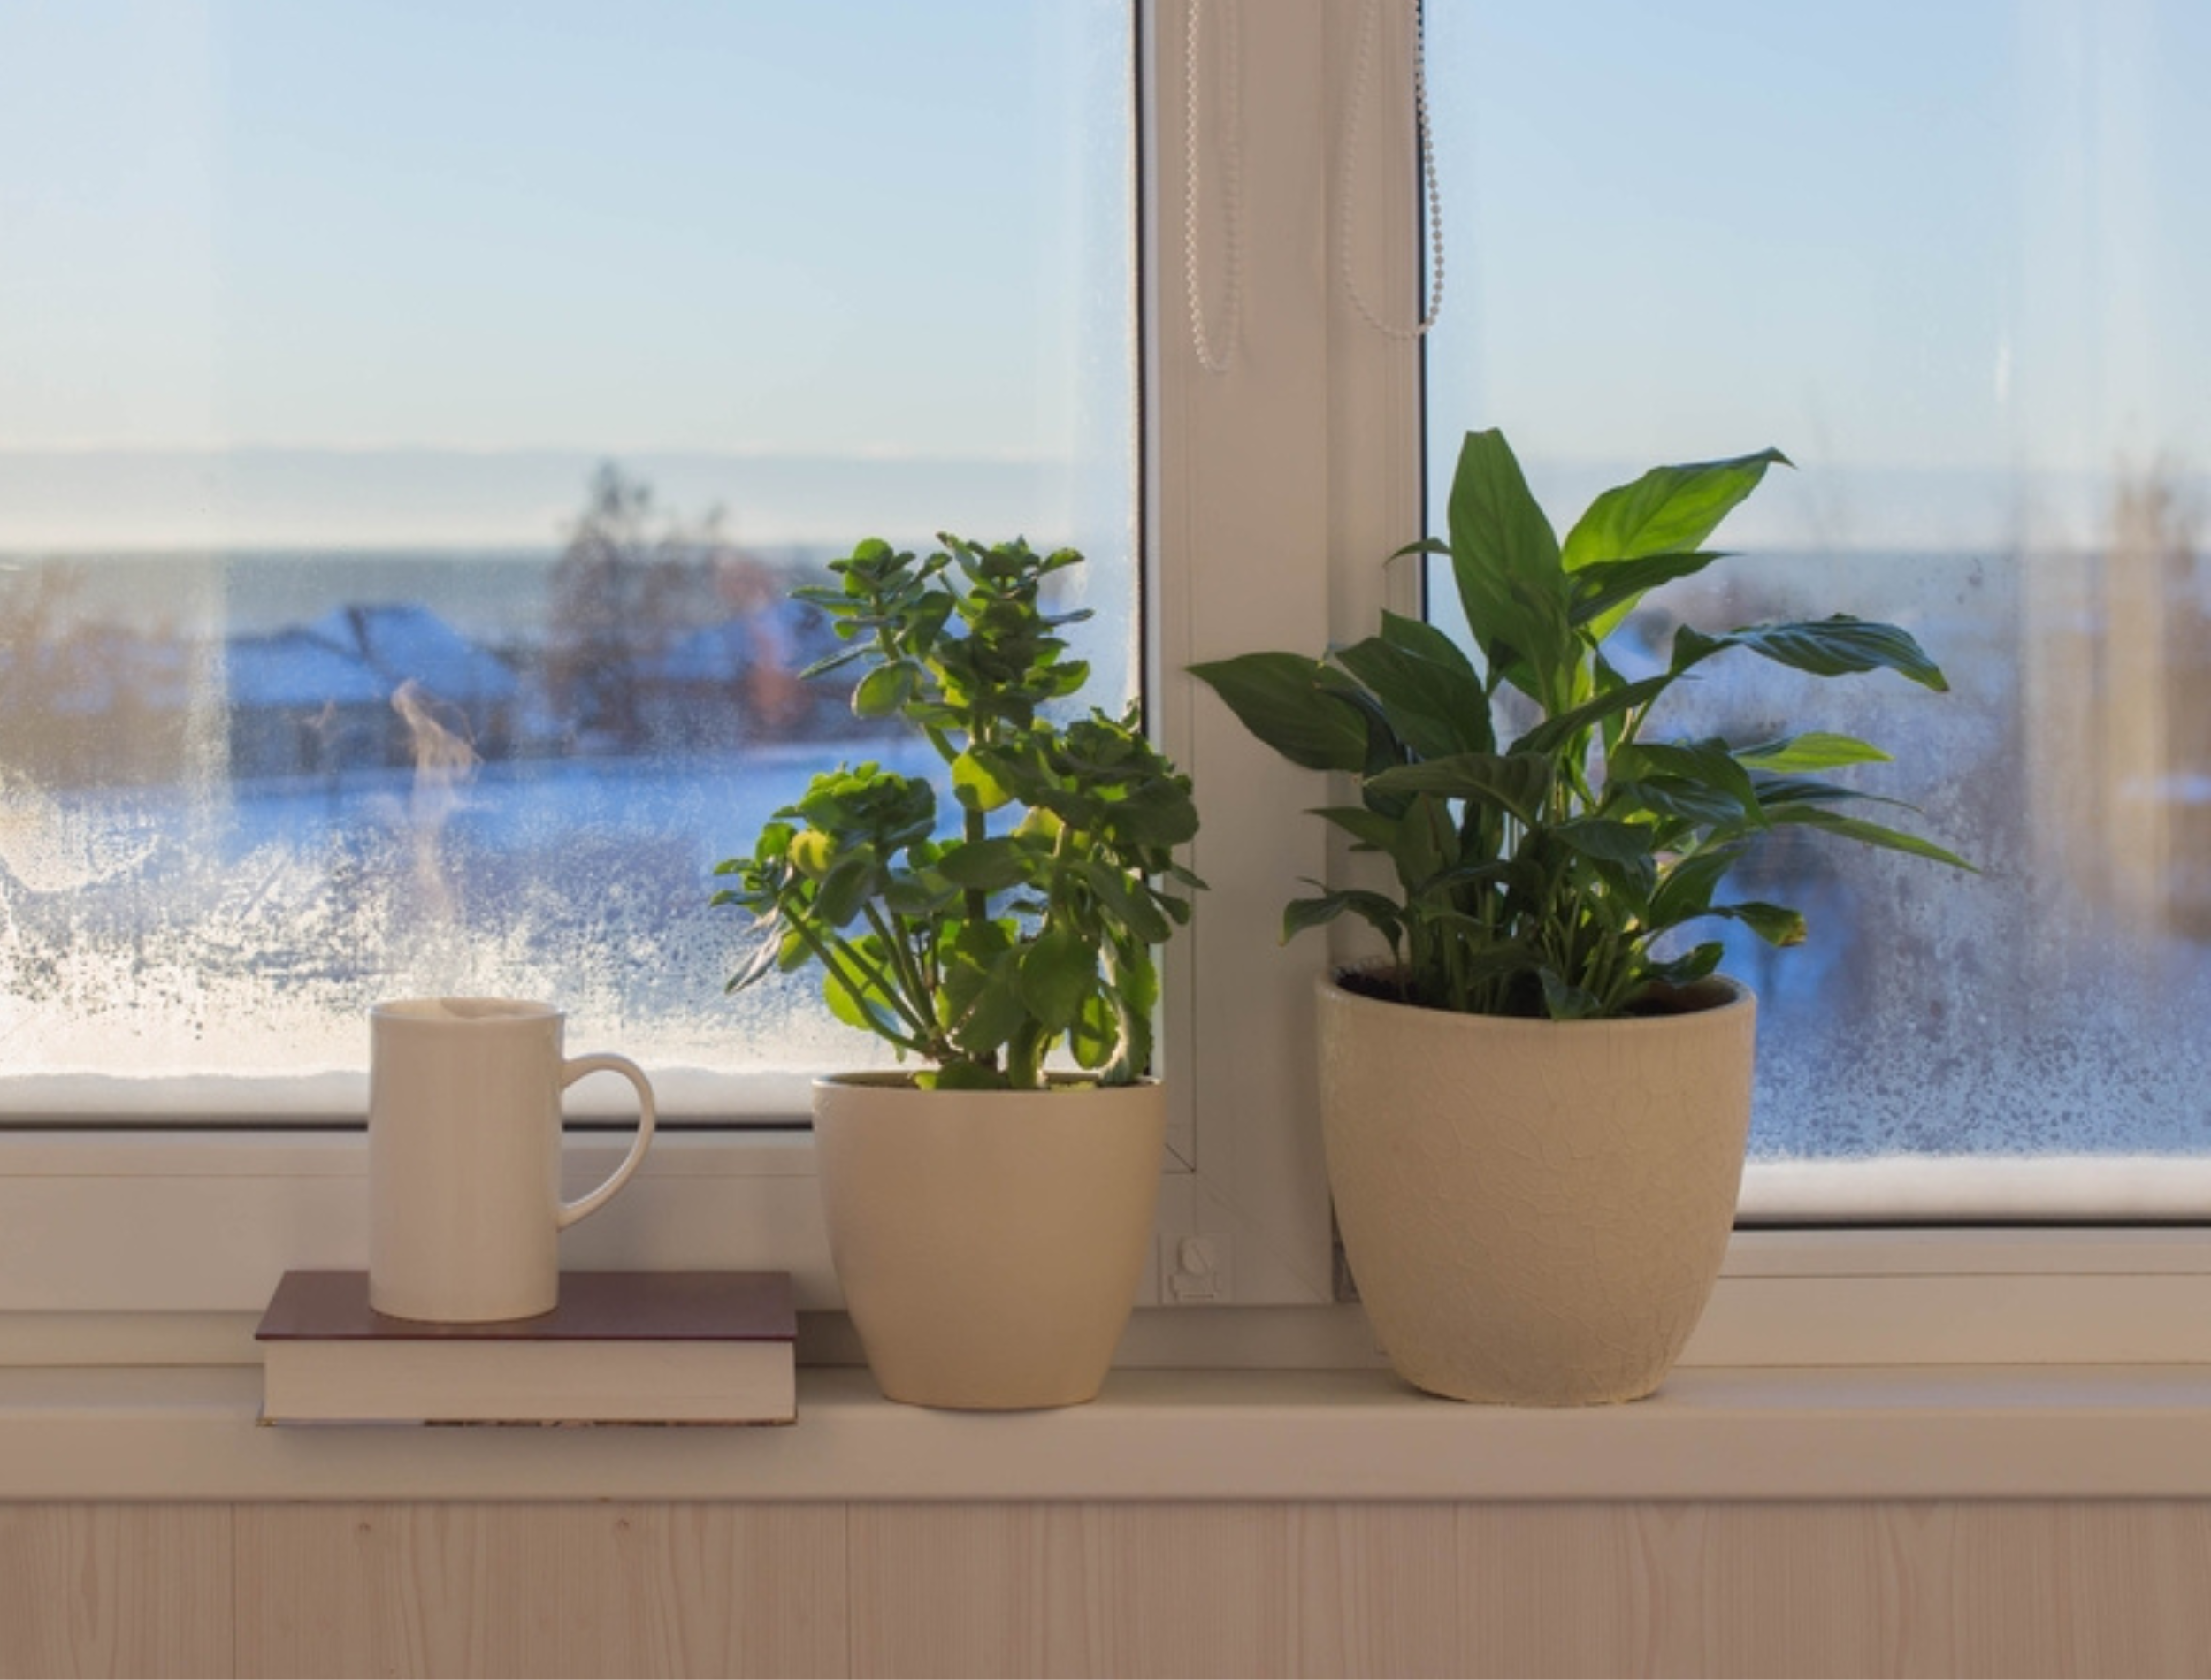 cup of coffee and houseplants on windowsill in sunlight in winter